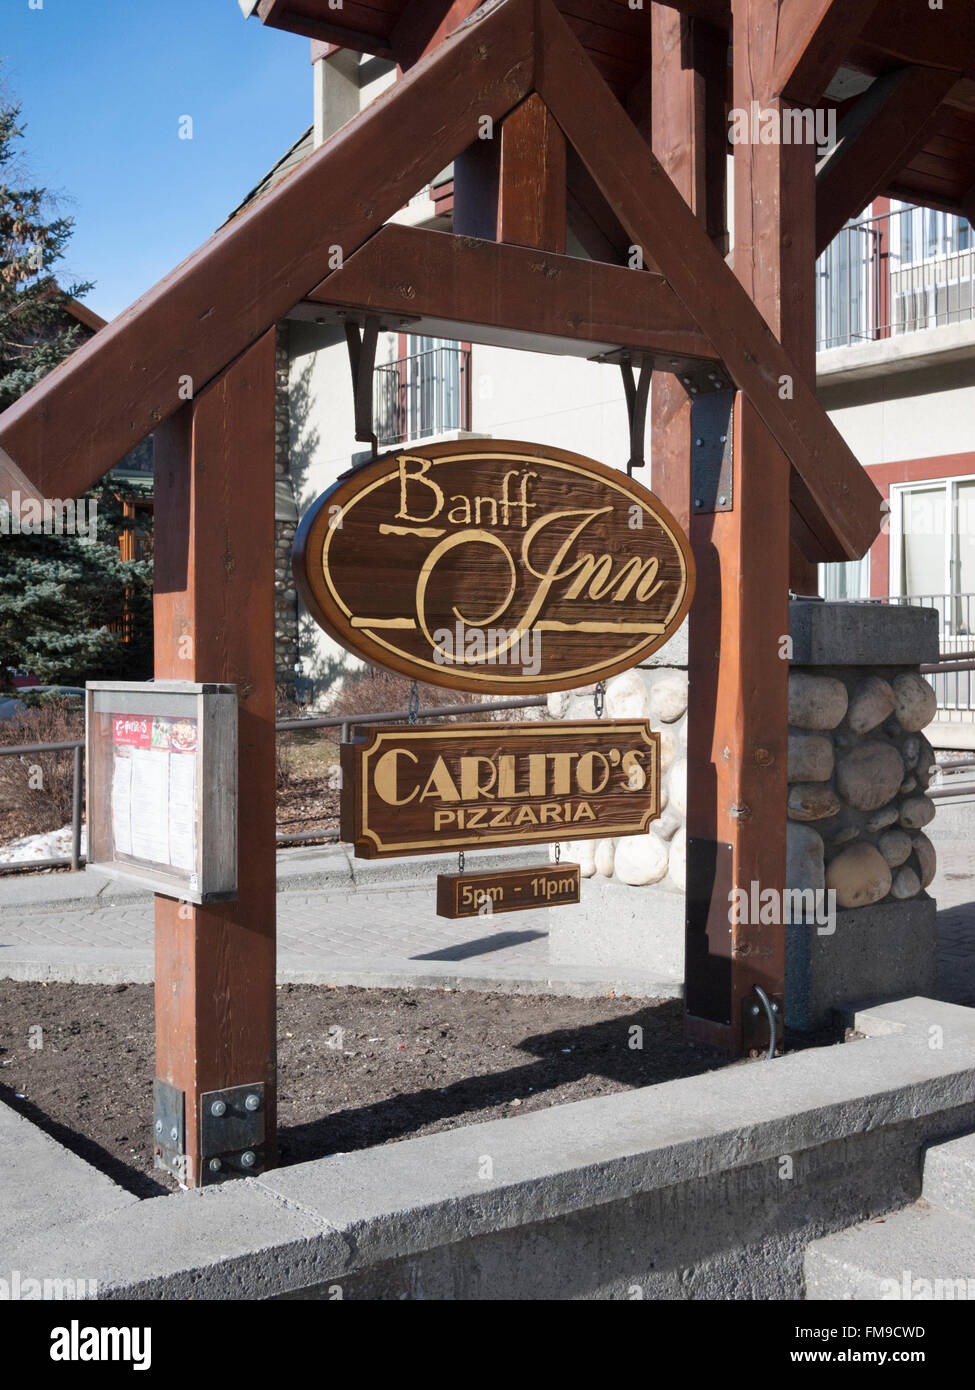 The sign for the Banff in and Carlito's pizzaria Banff Canada Stock Photo